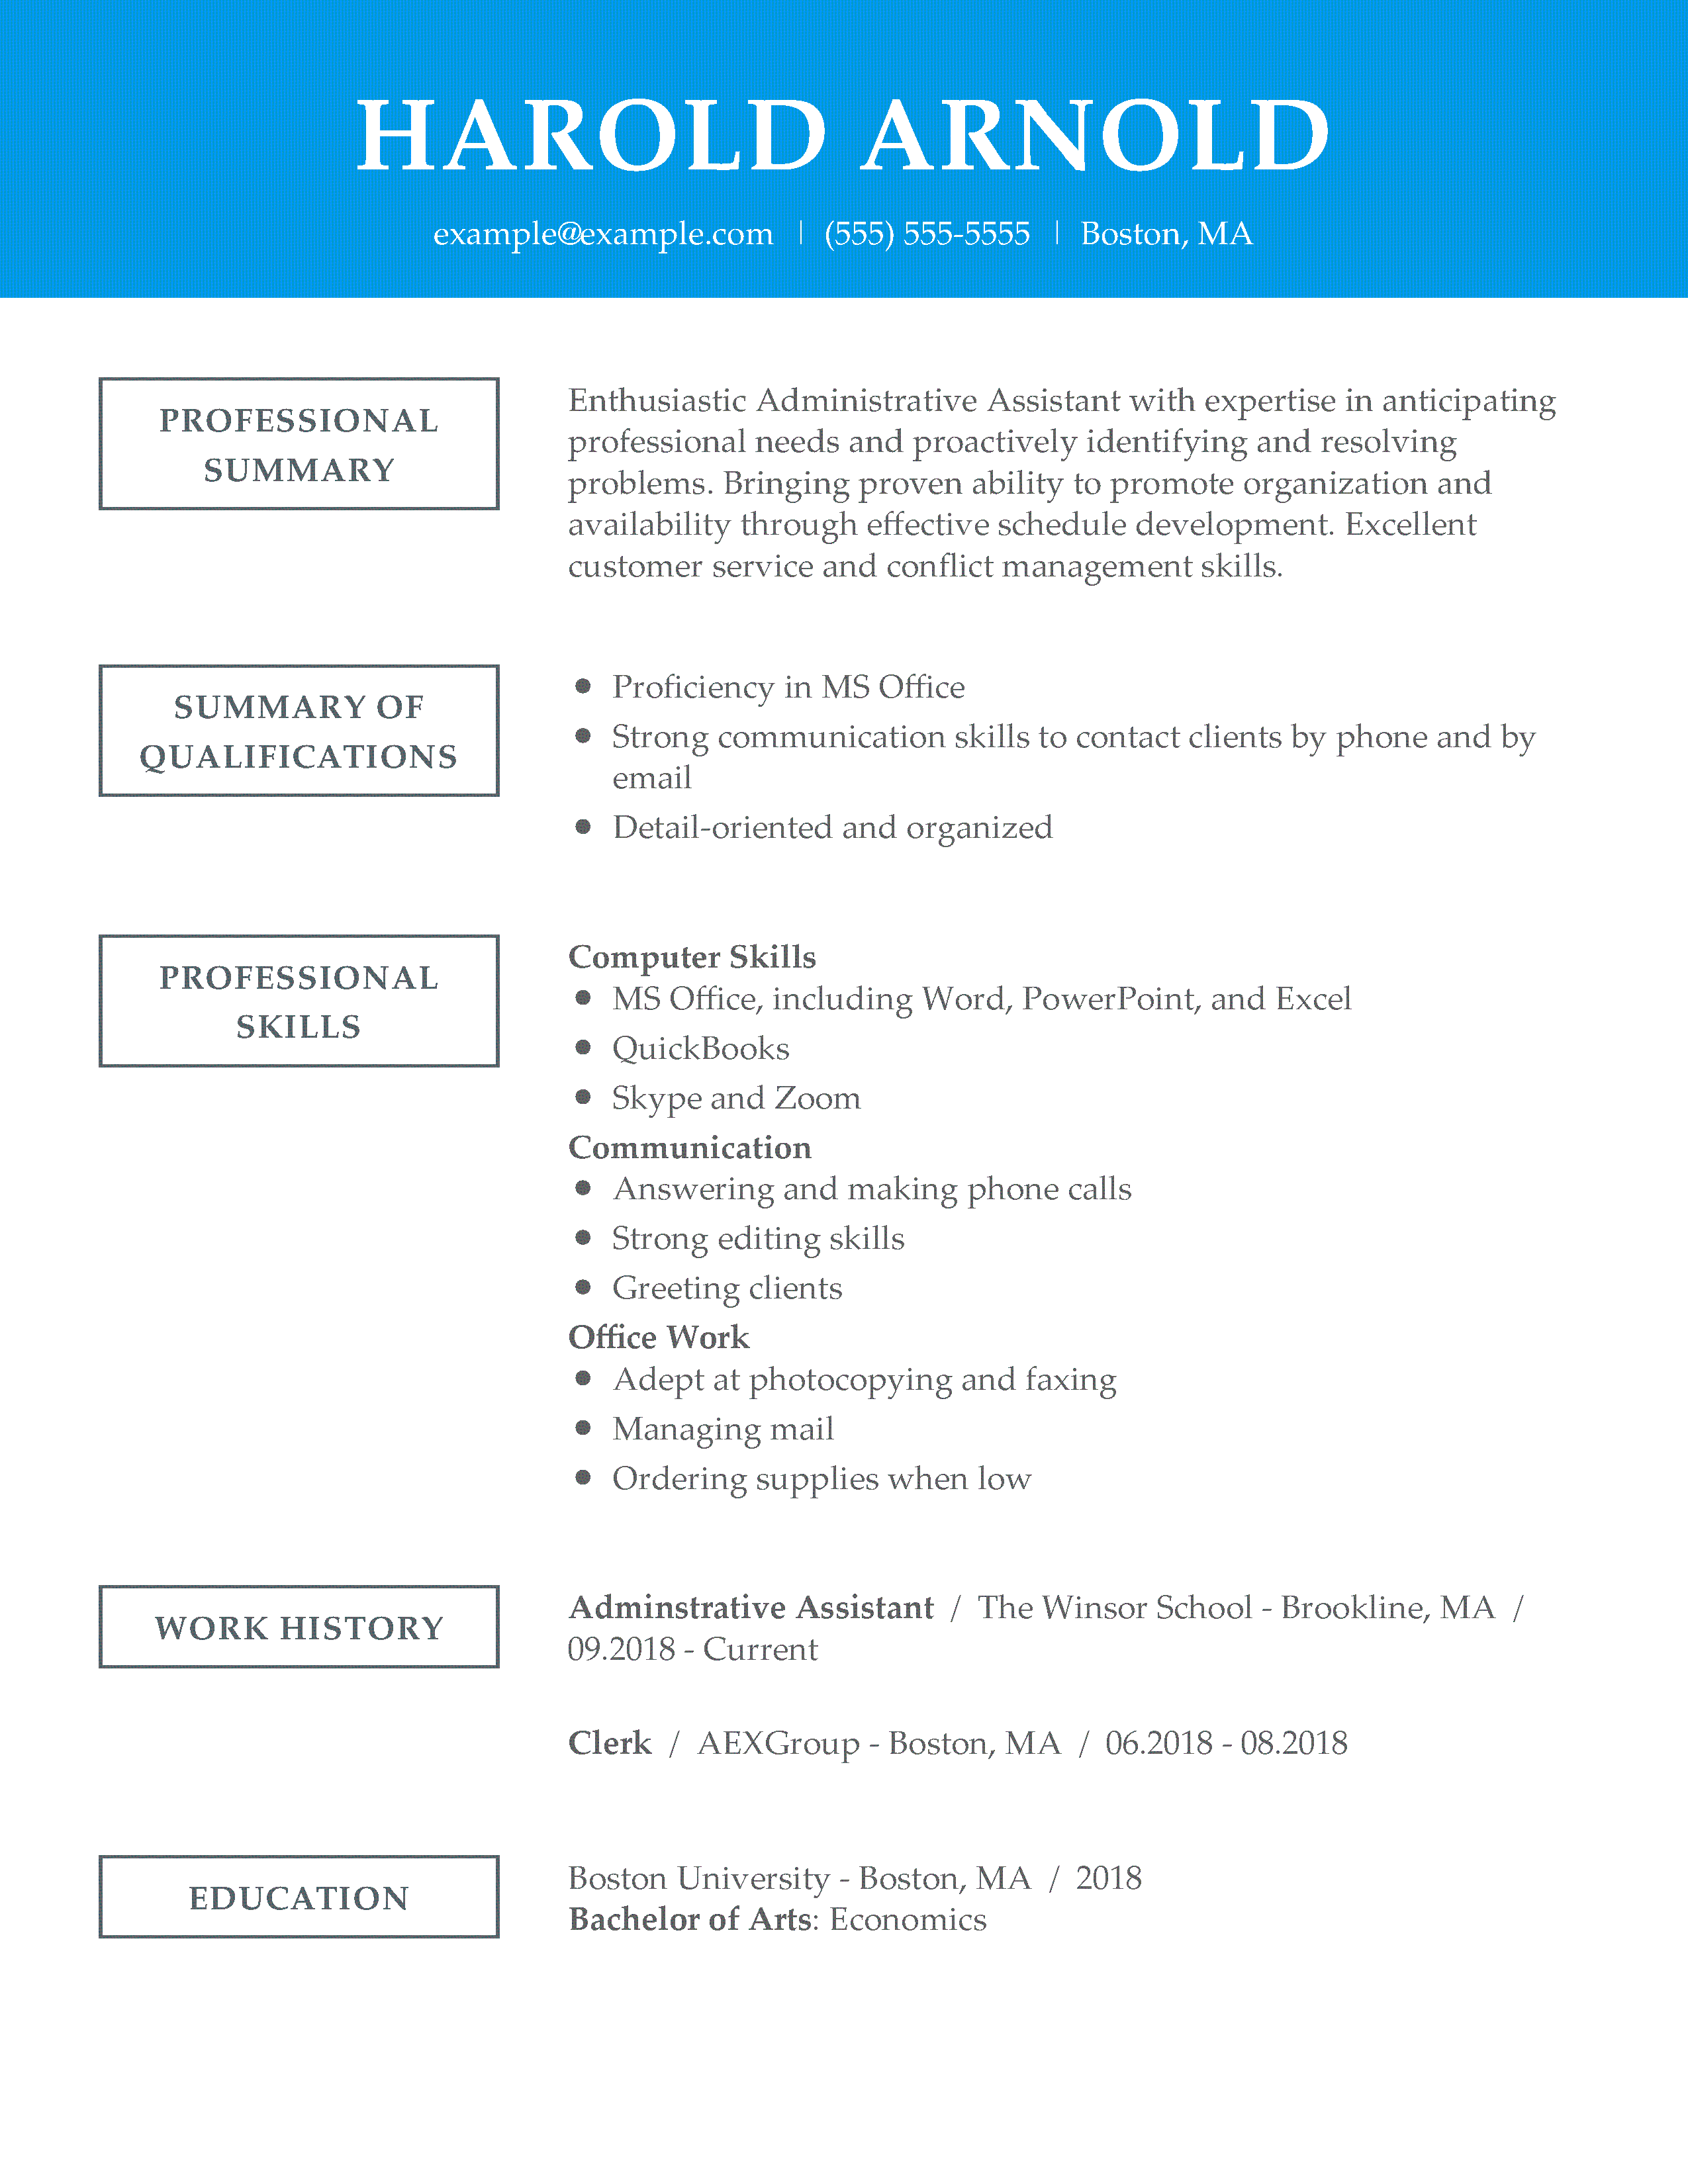 Professional Resume Examples Functional Adminstrative Assistant professional resume examples|wikiresume.com